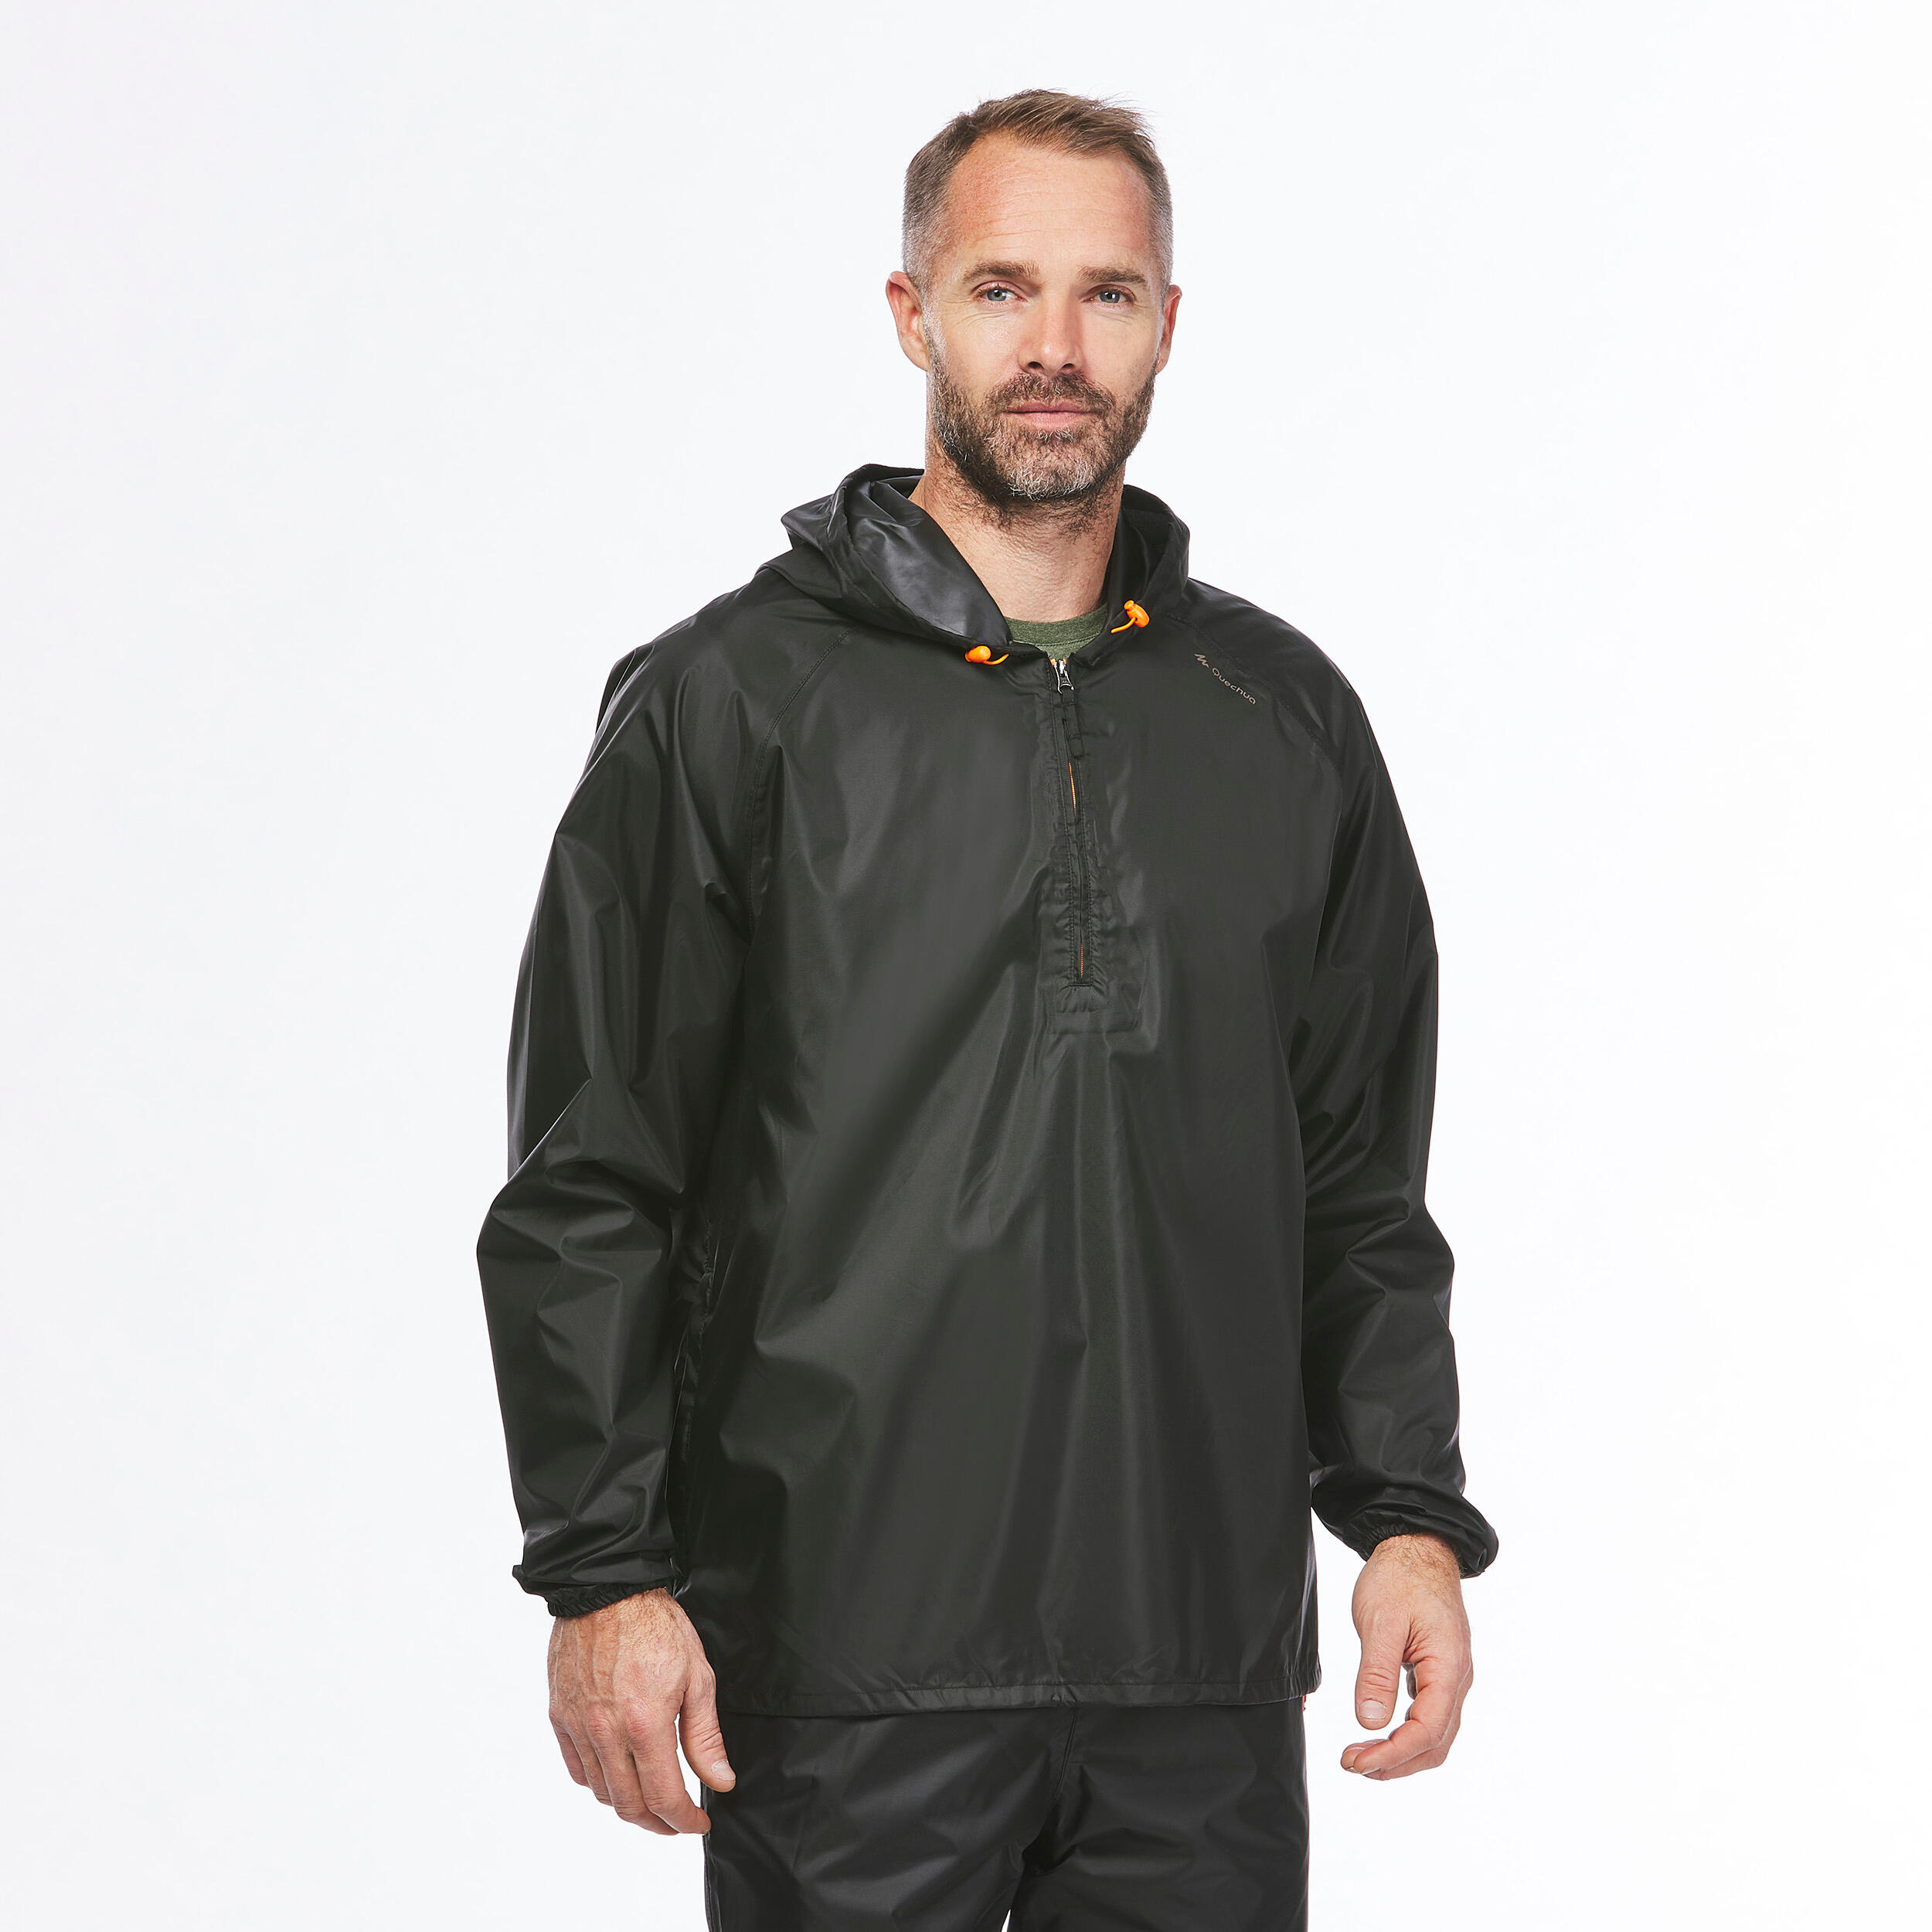 QUECHUA Forclaz 200 Rain Men's 3 in 1 Waterproof Hiking Jacket By Decathlon  - Buy QUECHUA Forclaz 200 Rain Men's 3 in 1 Waterproof Hiking Jacket By  Decathlon Online at Best Prices in India on Snapdeal